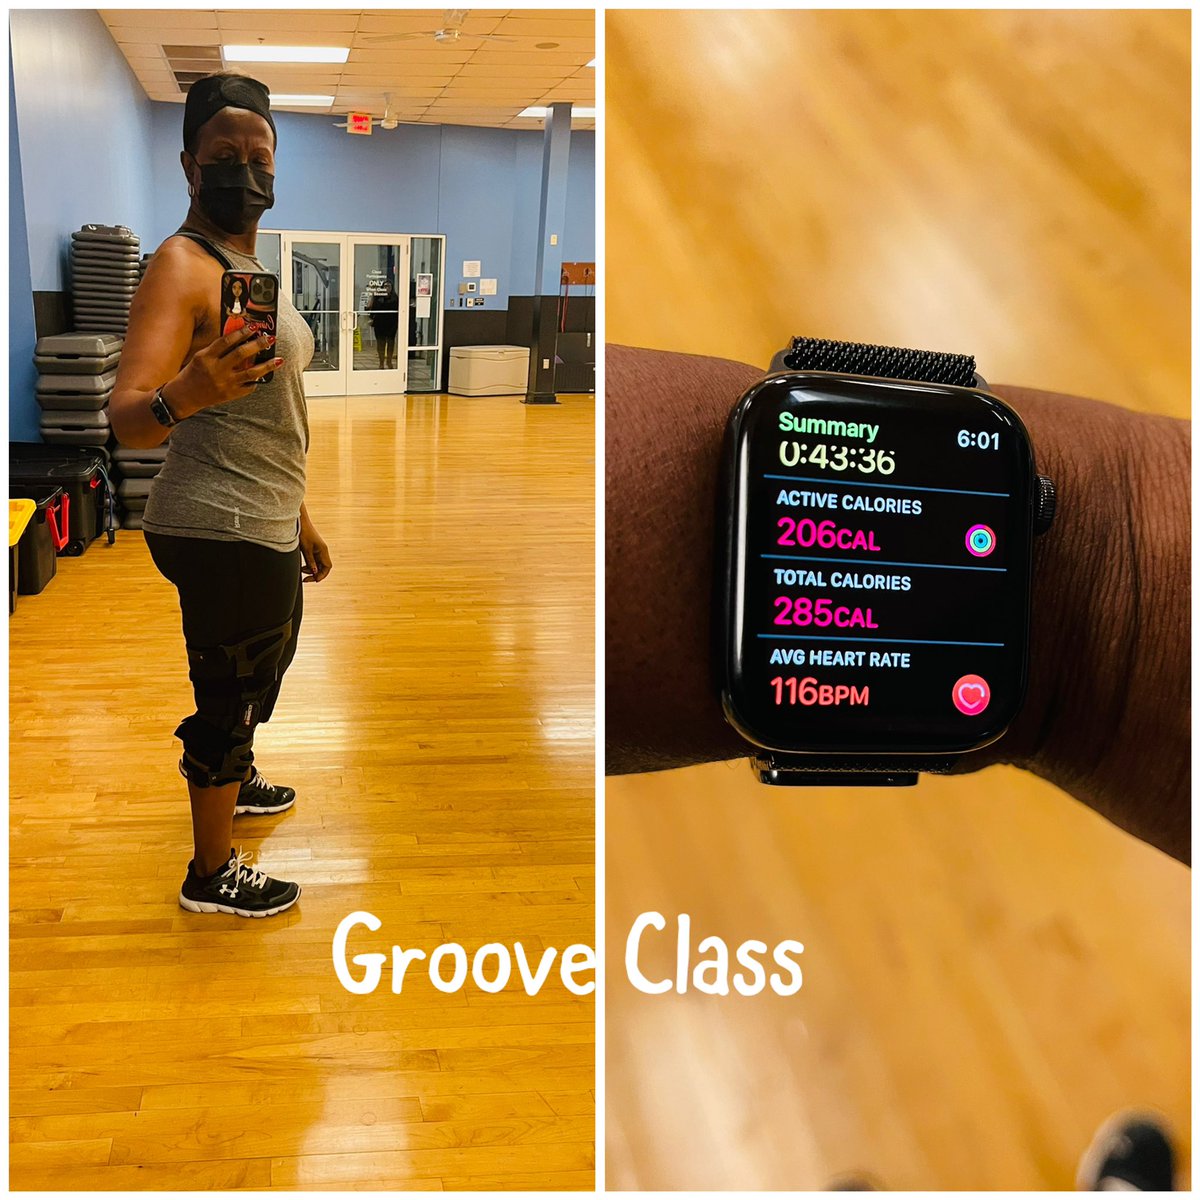 Groove class complete.✅ #MondayFitness #Grooving #FitLeaders #SelfCare #LetsGo💃🏽💃🏽💃🏽